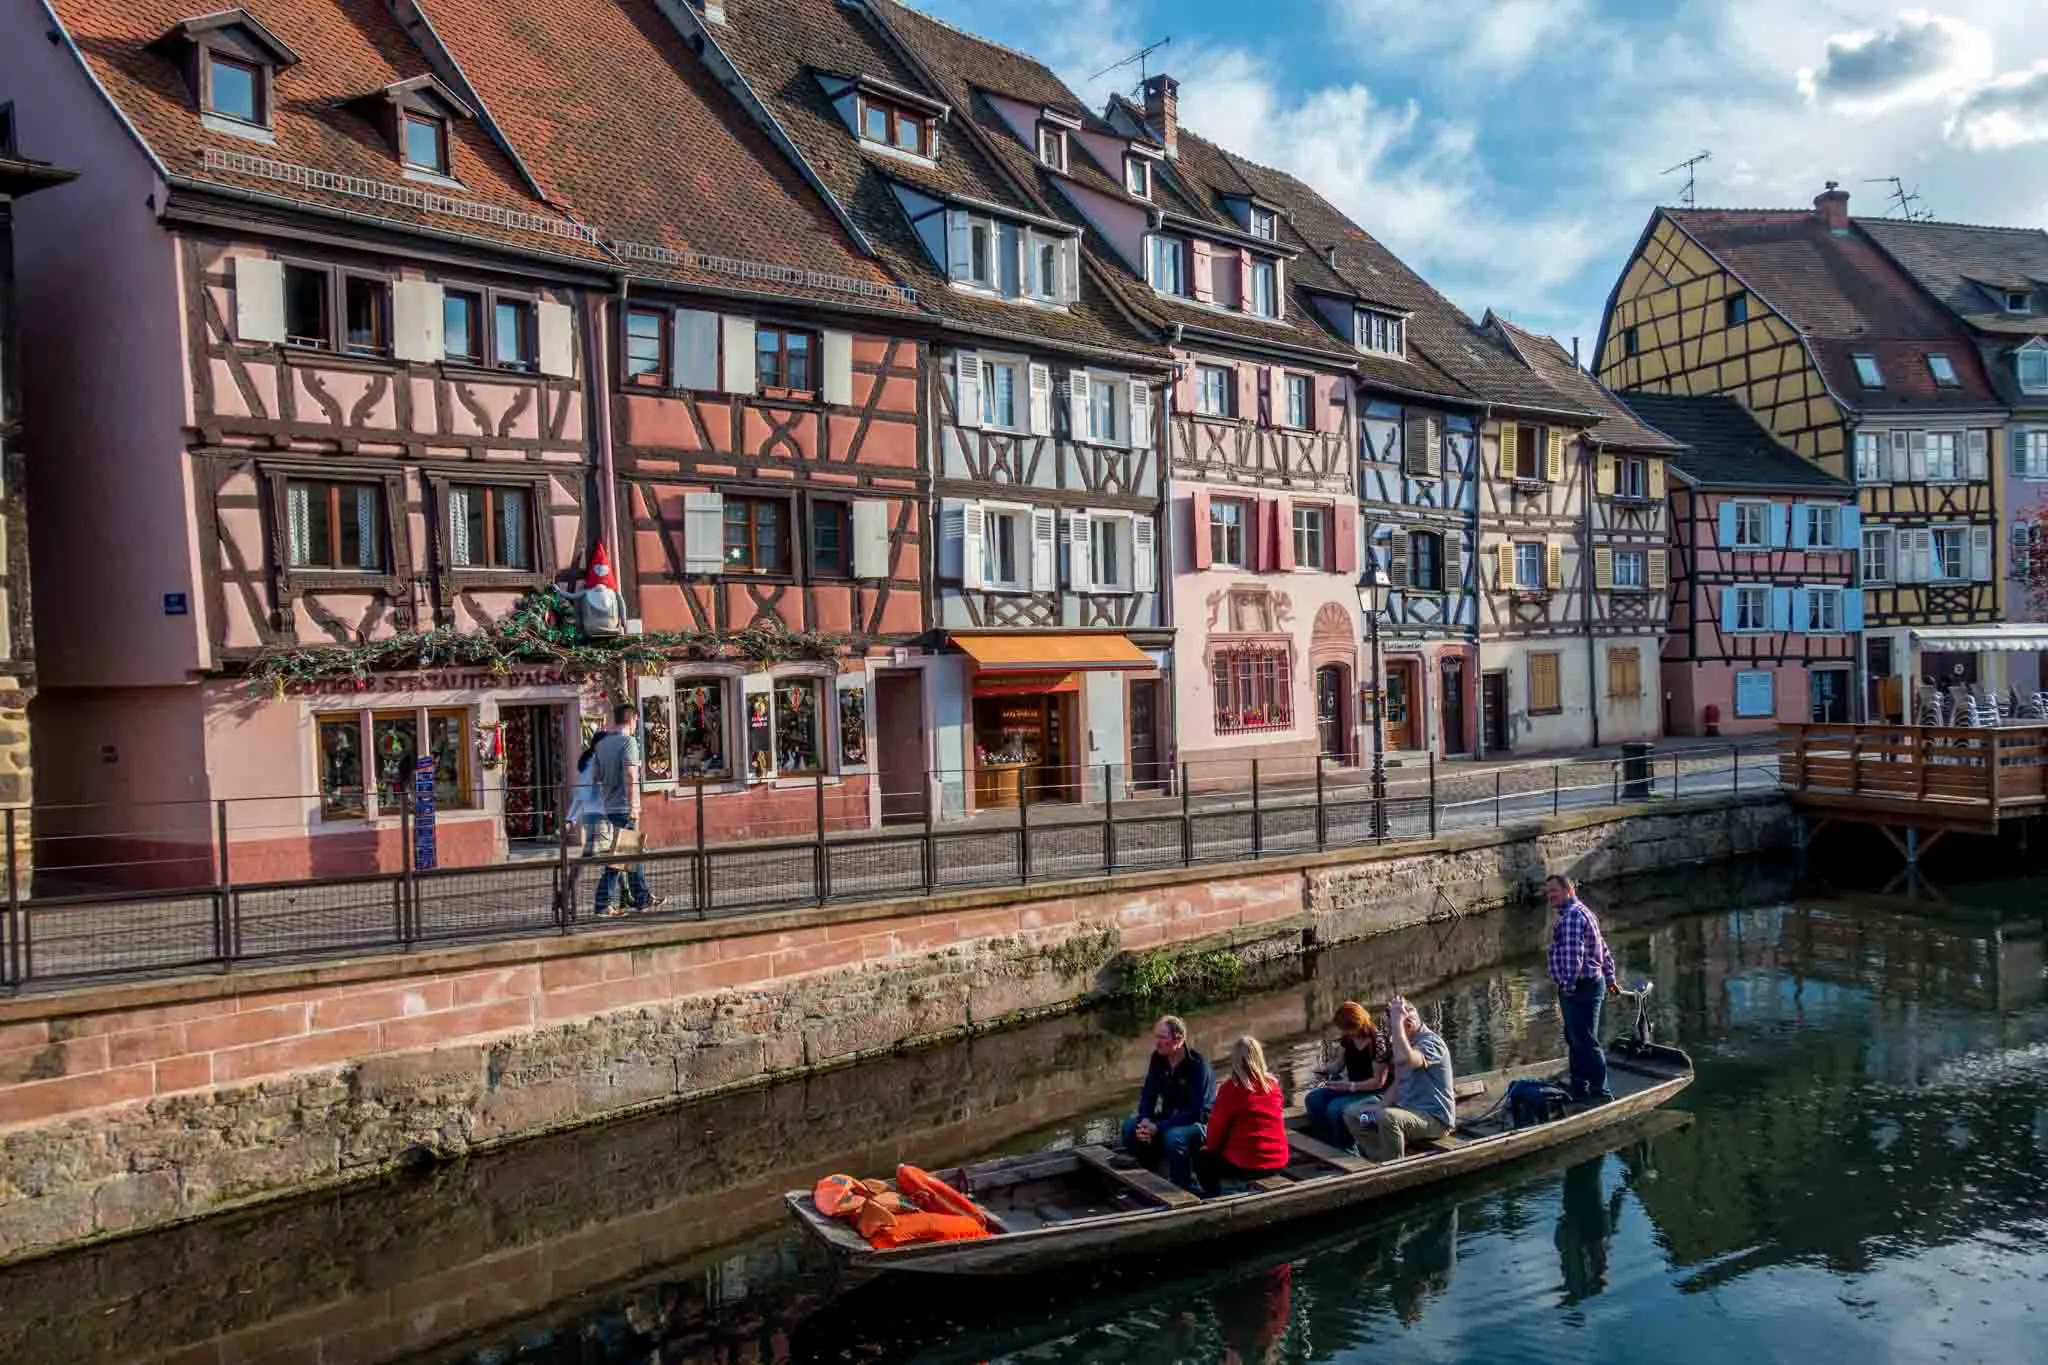 Canal boat beside the colorful half timber buildings in the Petite Venise area of Colmar France